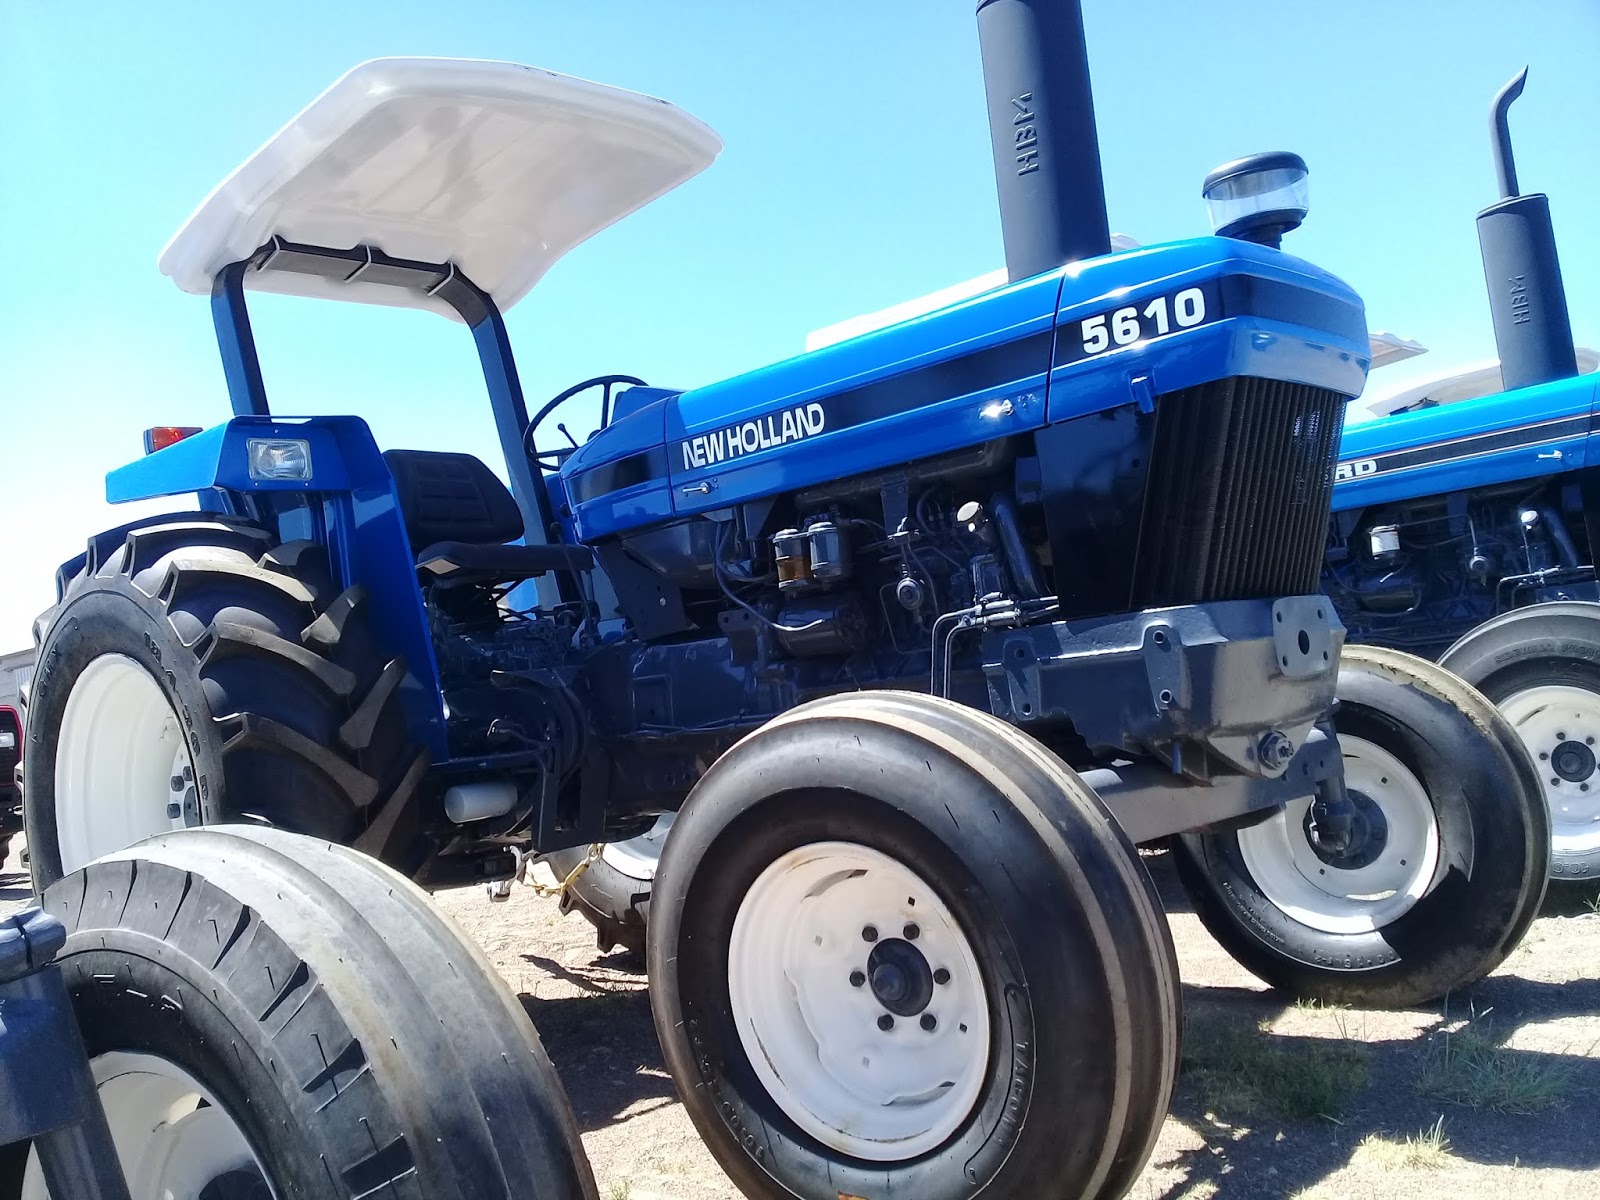 MAQUINARIA AGRICOLA INDUSTRIAL: Tractor Ford 5610 $14,500 Dlls.